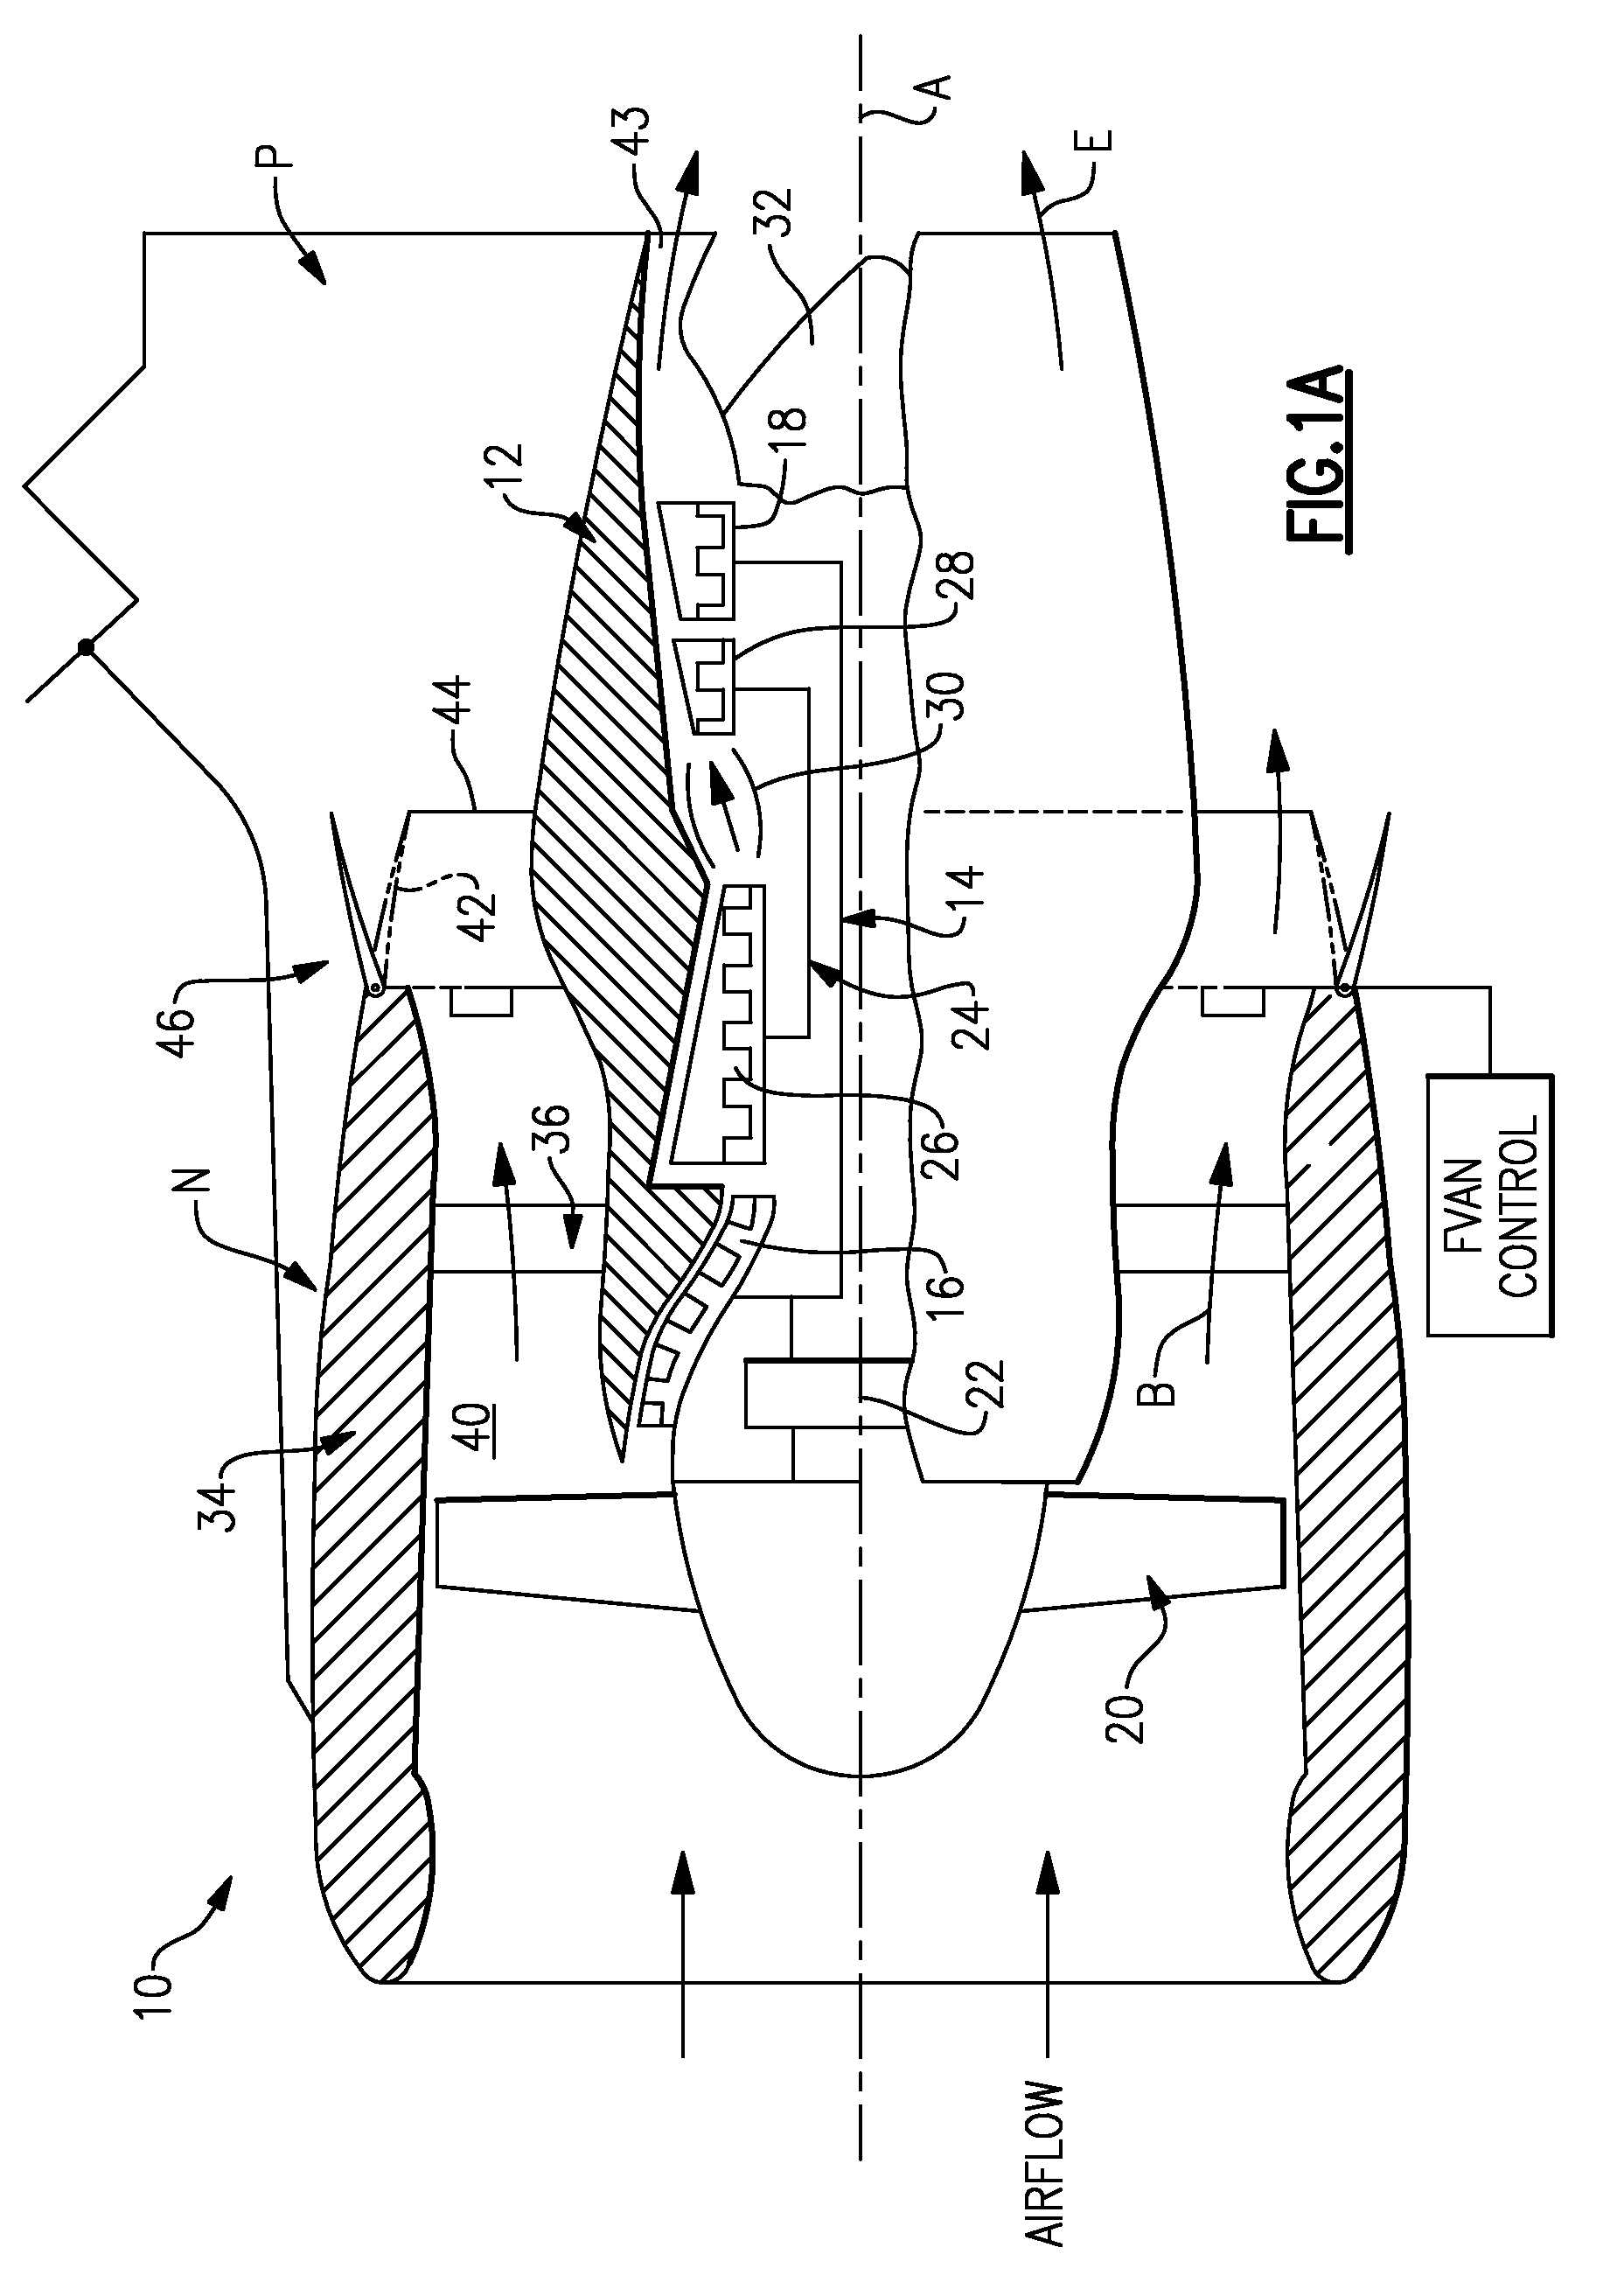 Fan variable area nozzle for a gas turbine engine fan nacelle with cam drive ring actuation system